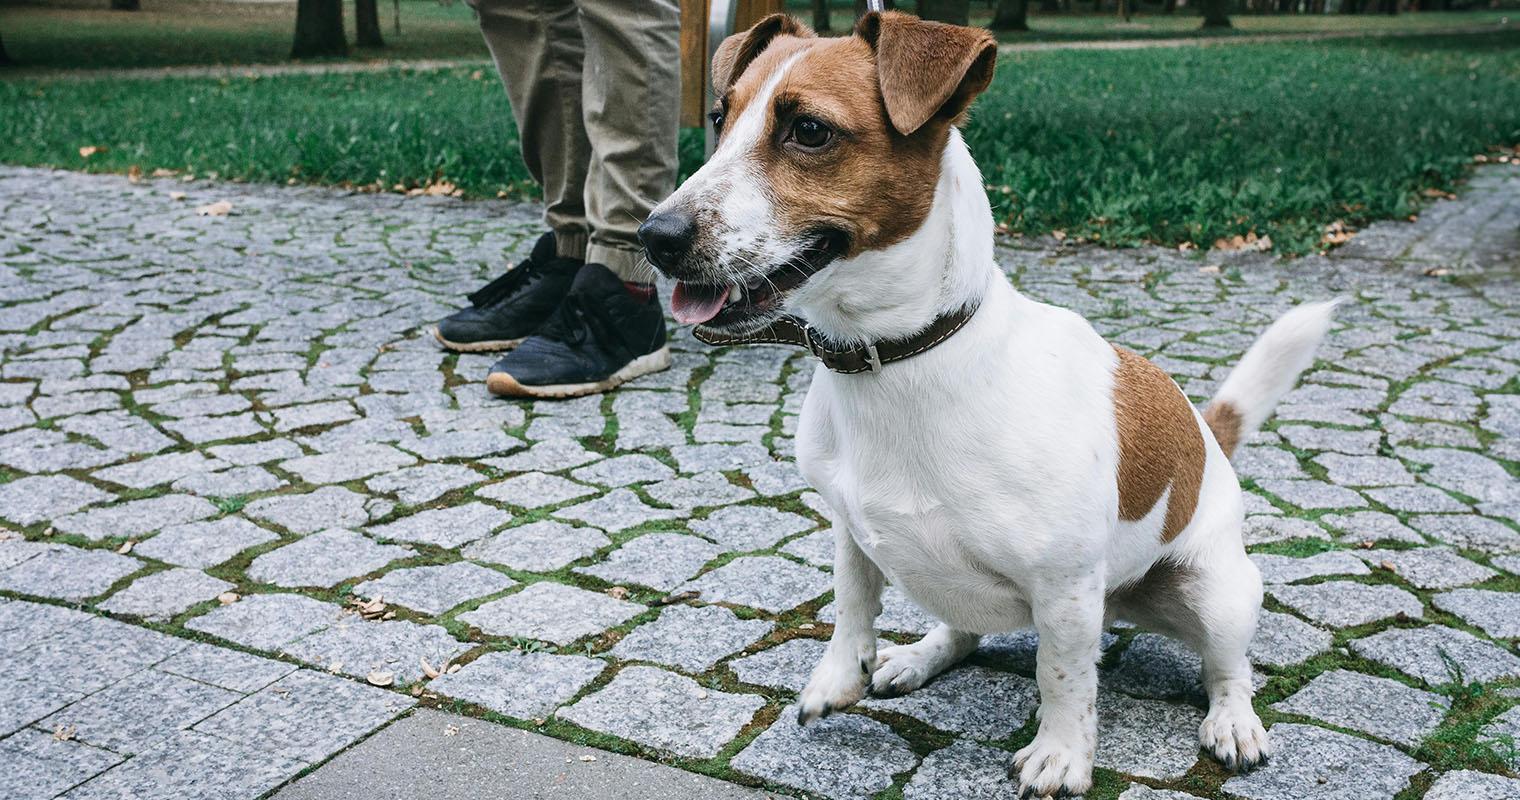 How Do I Find a Good Home for My Jack Russell Terrier?